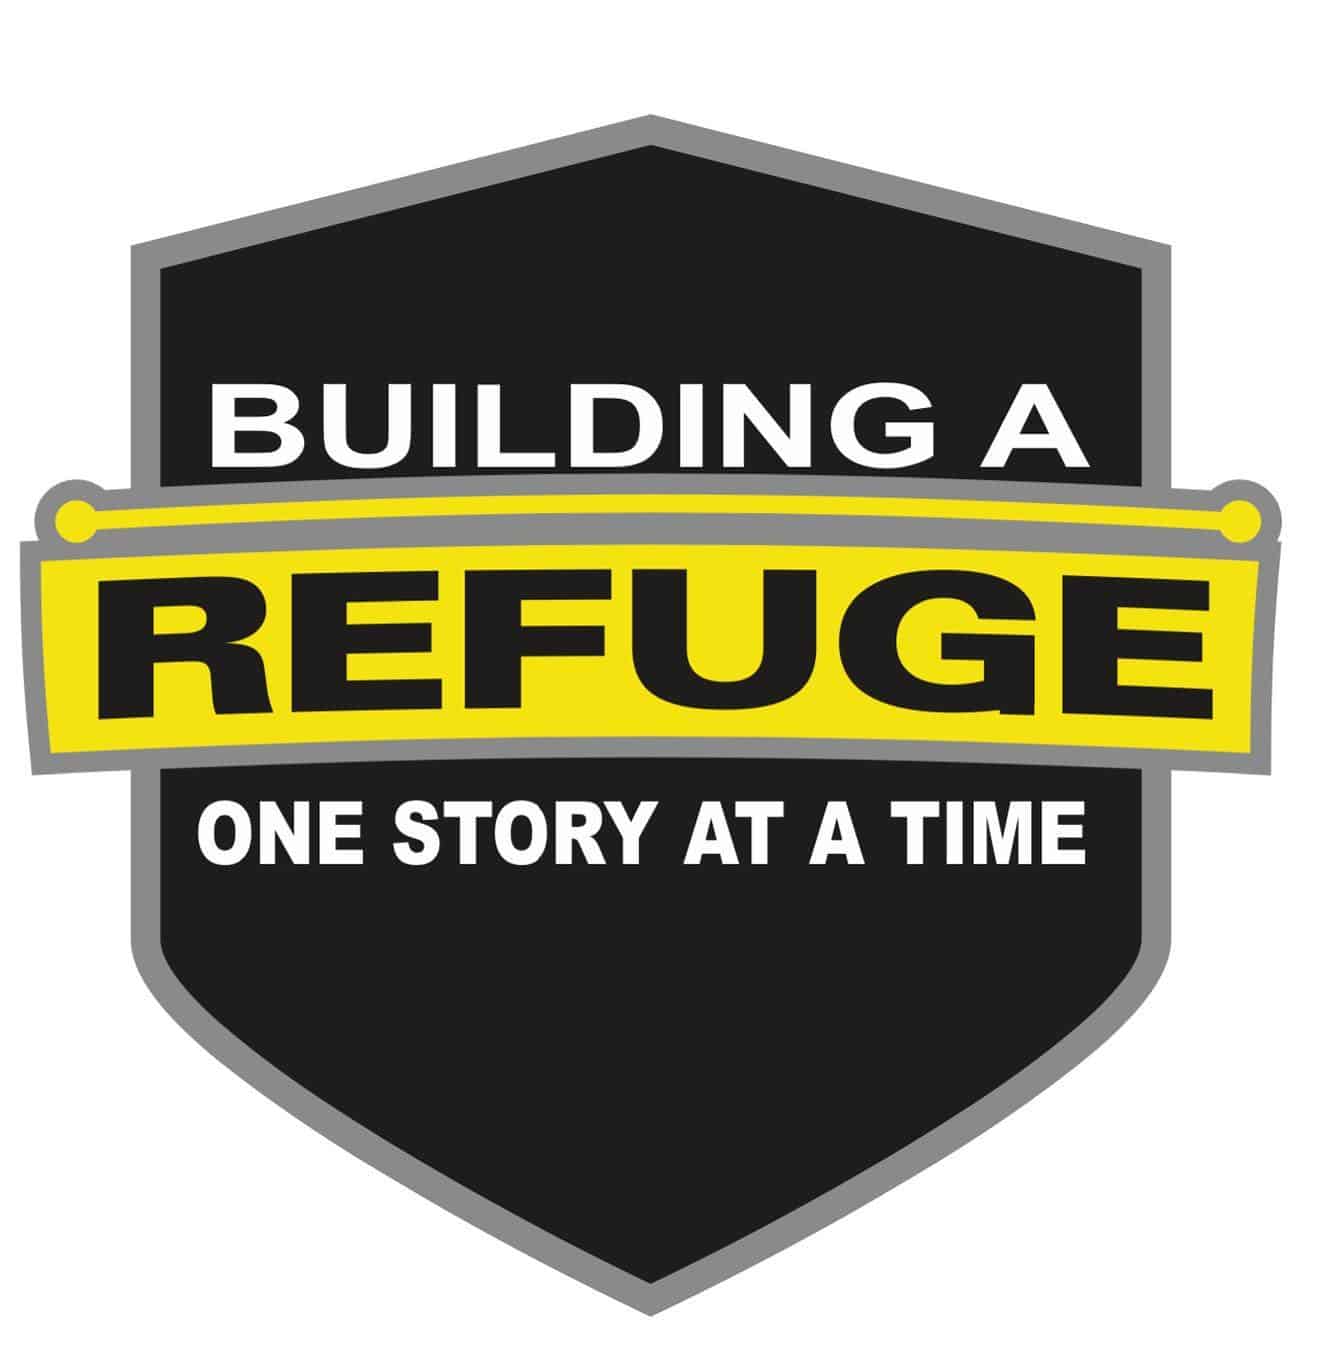 Building A Refuge Logo. "One Story At A Time"